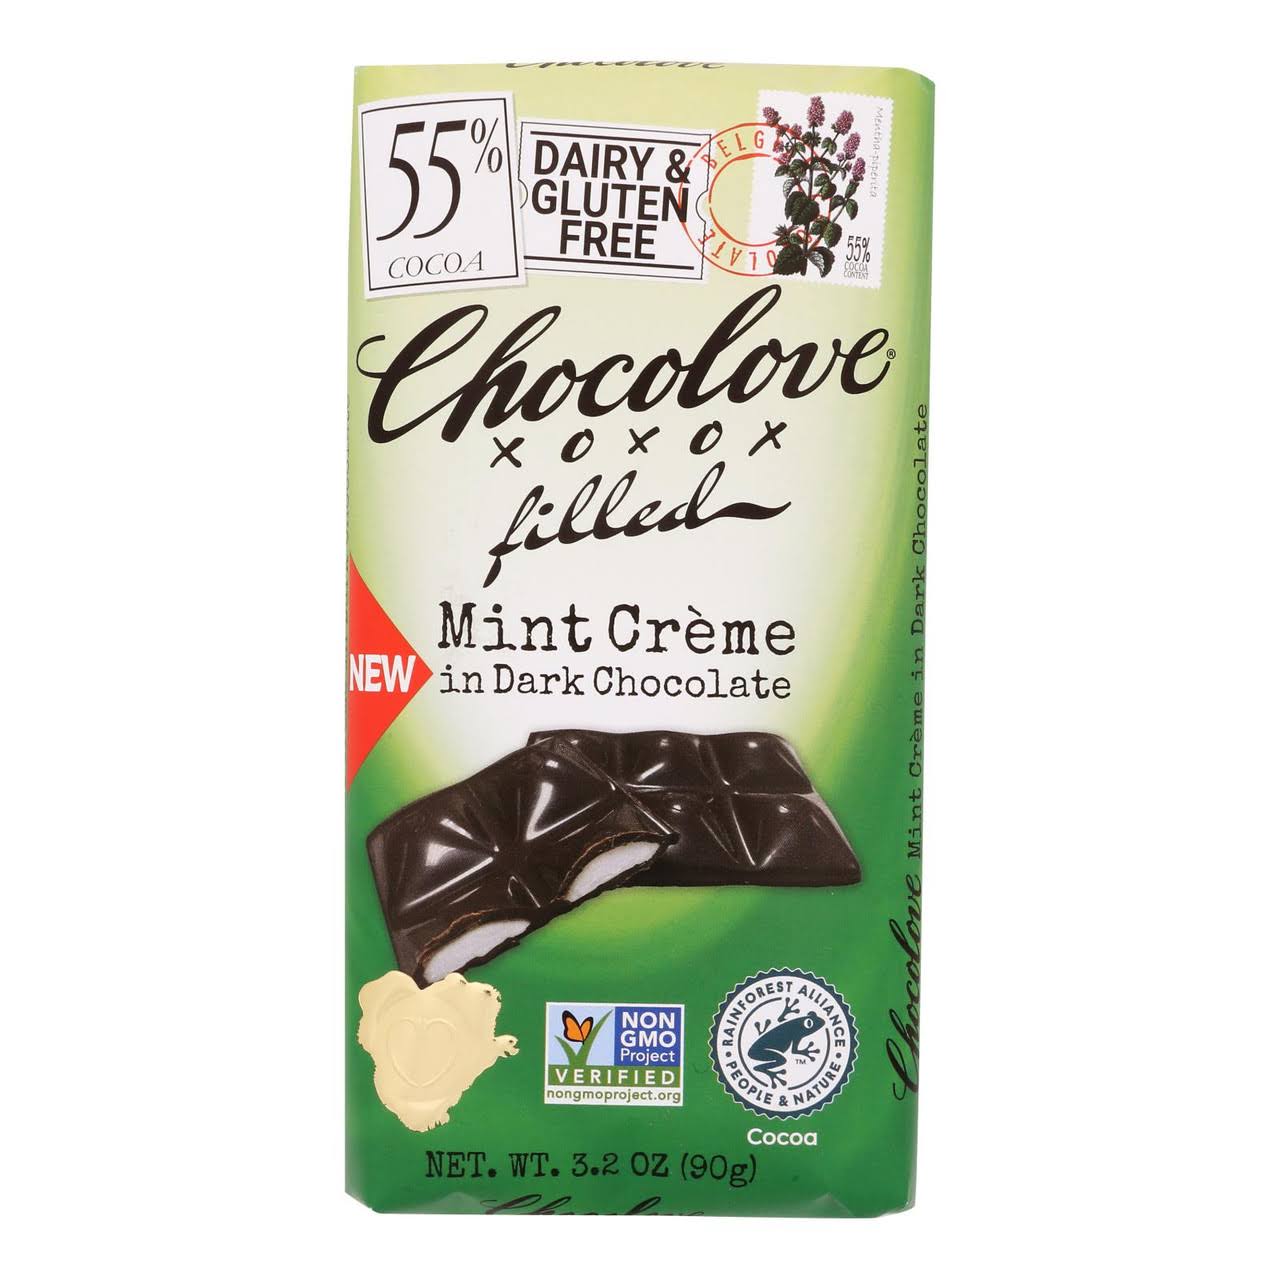 Chocolove, Filled Mint Creme in Dark Chocolate, 55% Cocoa, 3.2 oz (90 g)